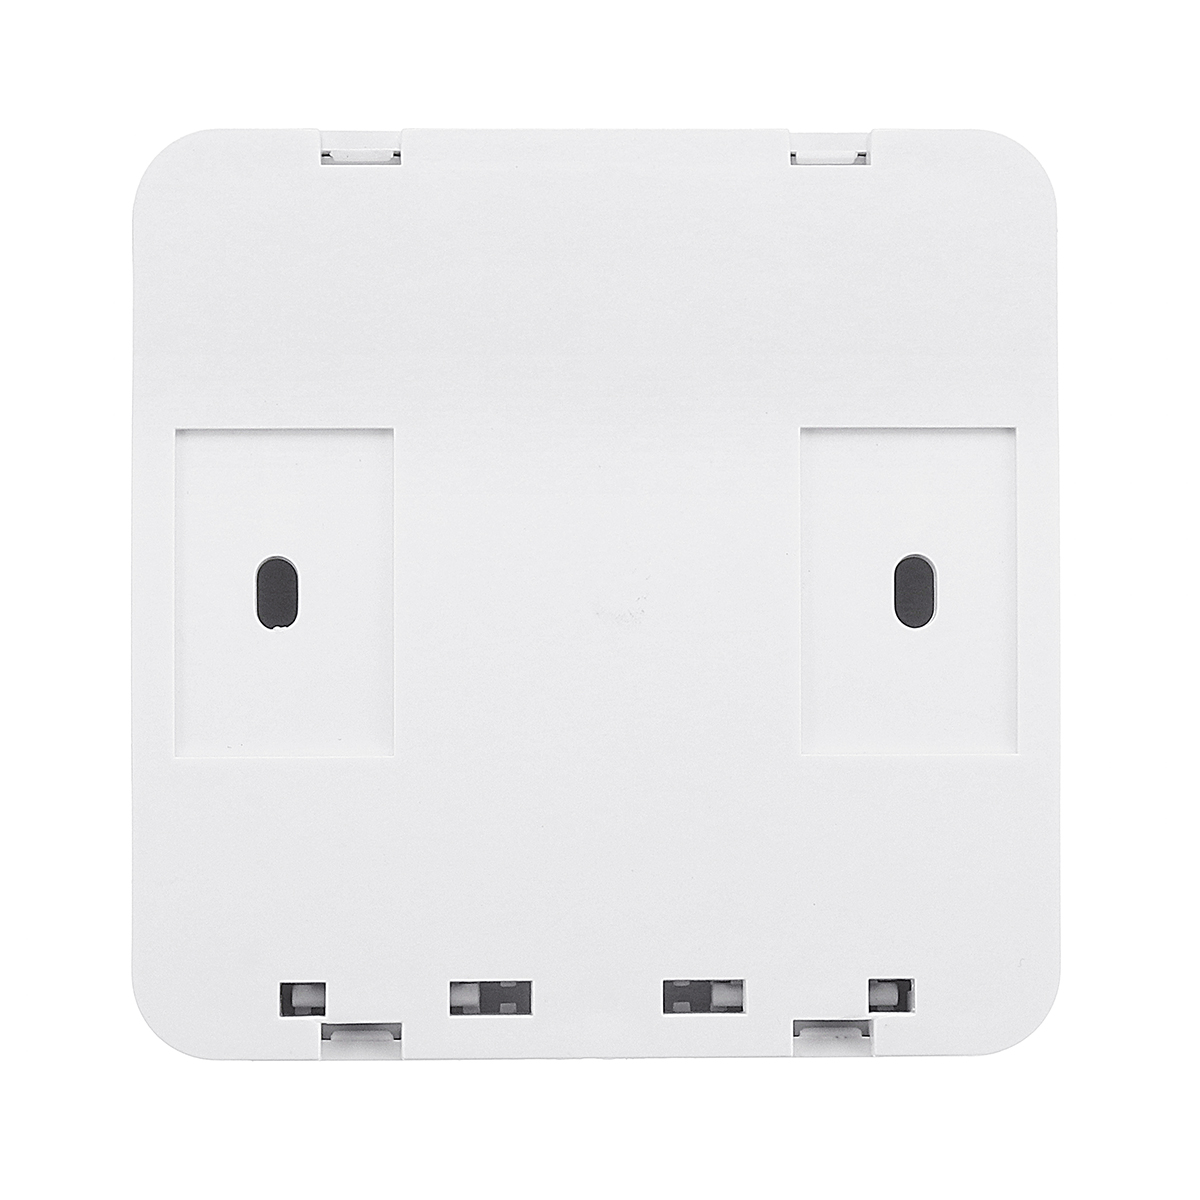 123-Way-Push-Button-Switch-Remote-Control-Switch-86-Wall-Panel-315MHz-Wireless-1334553-6